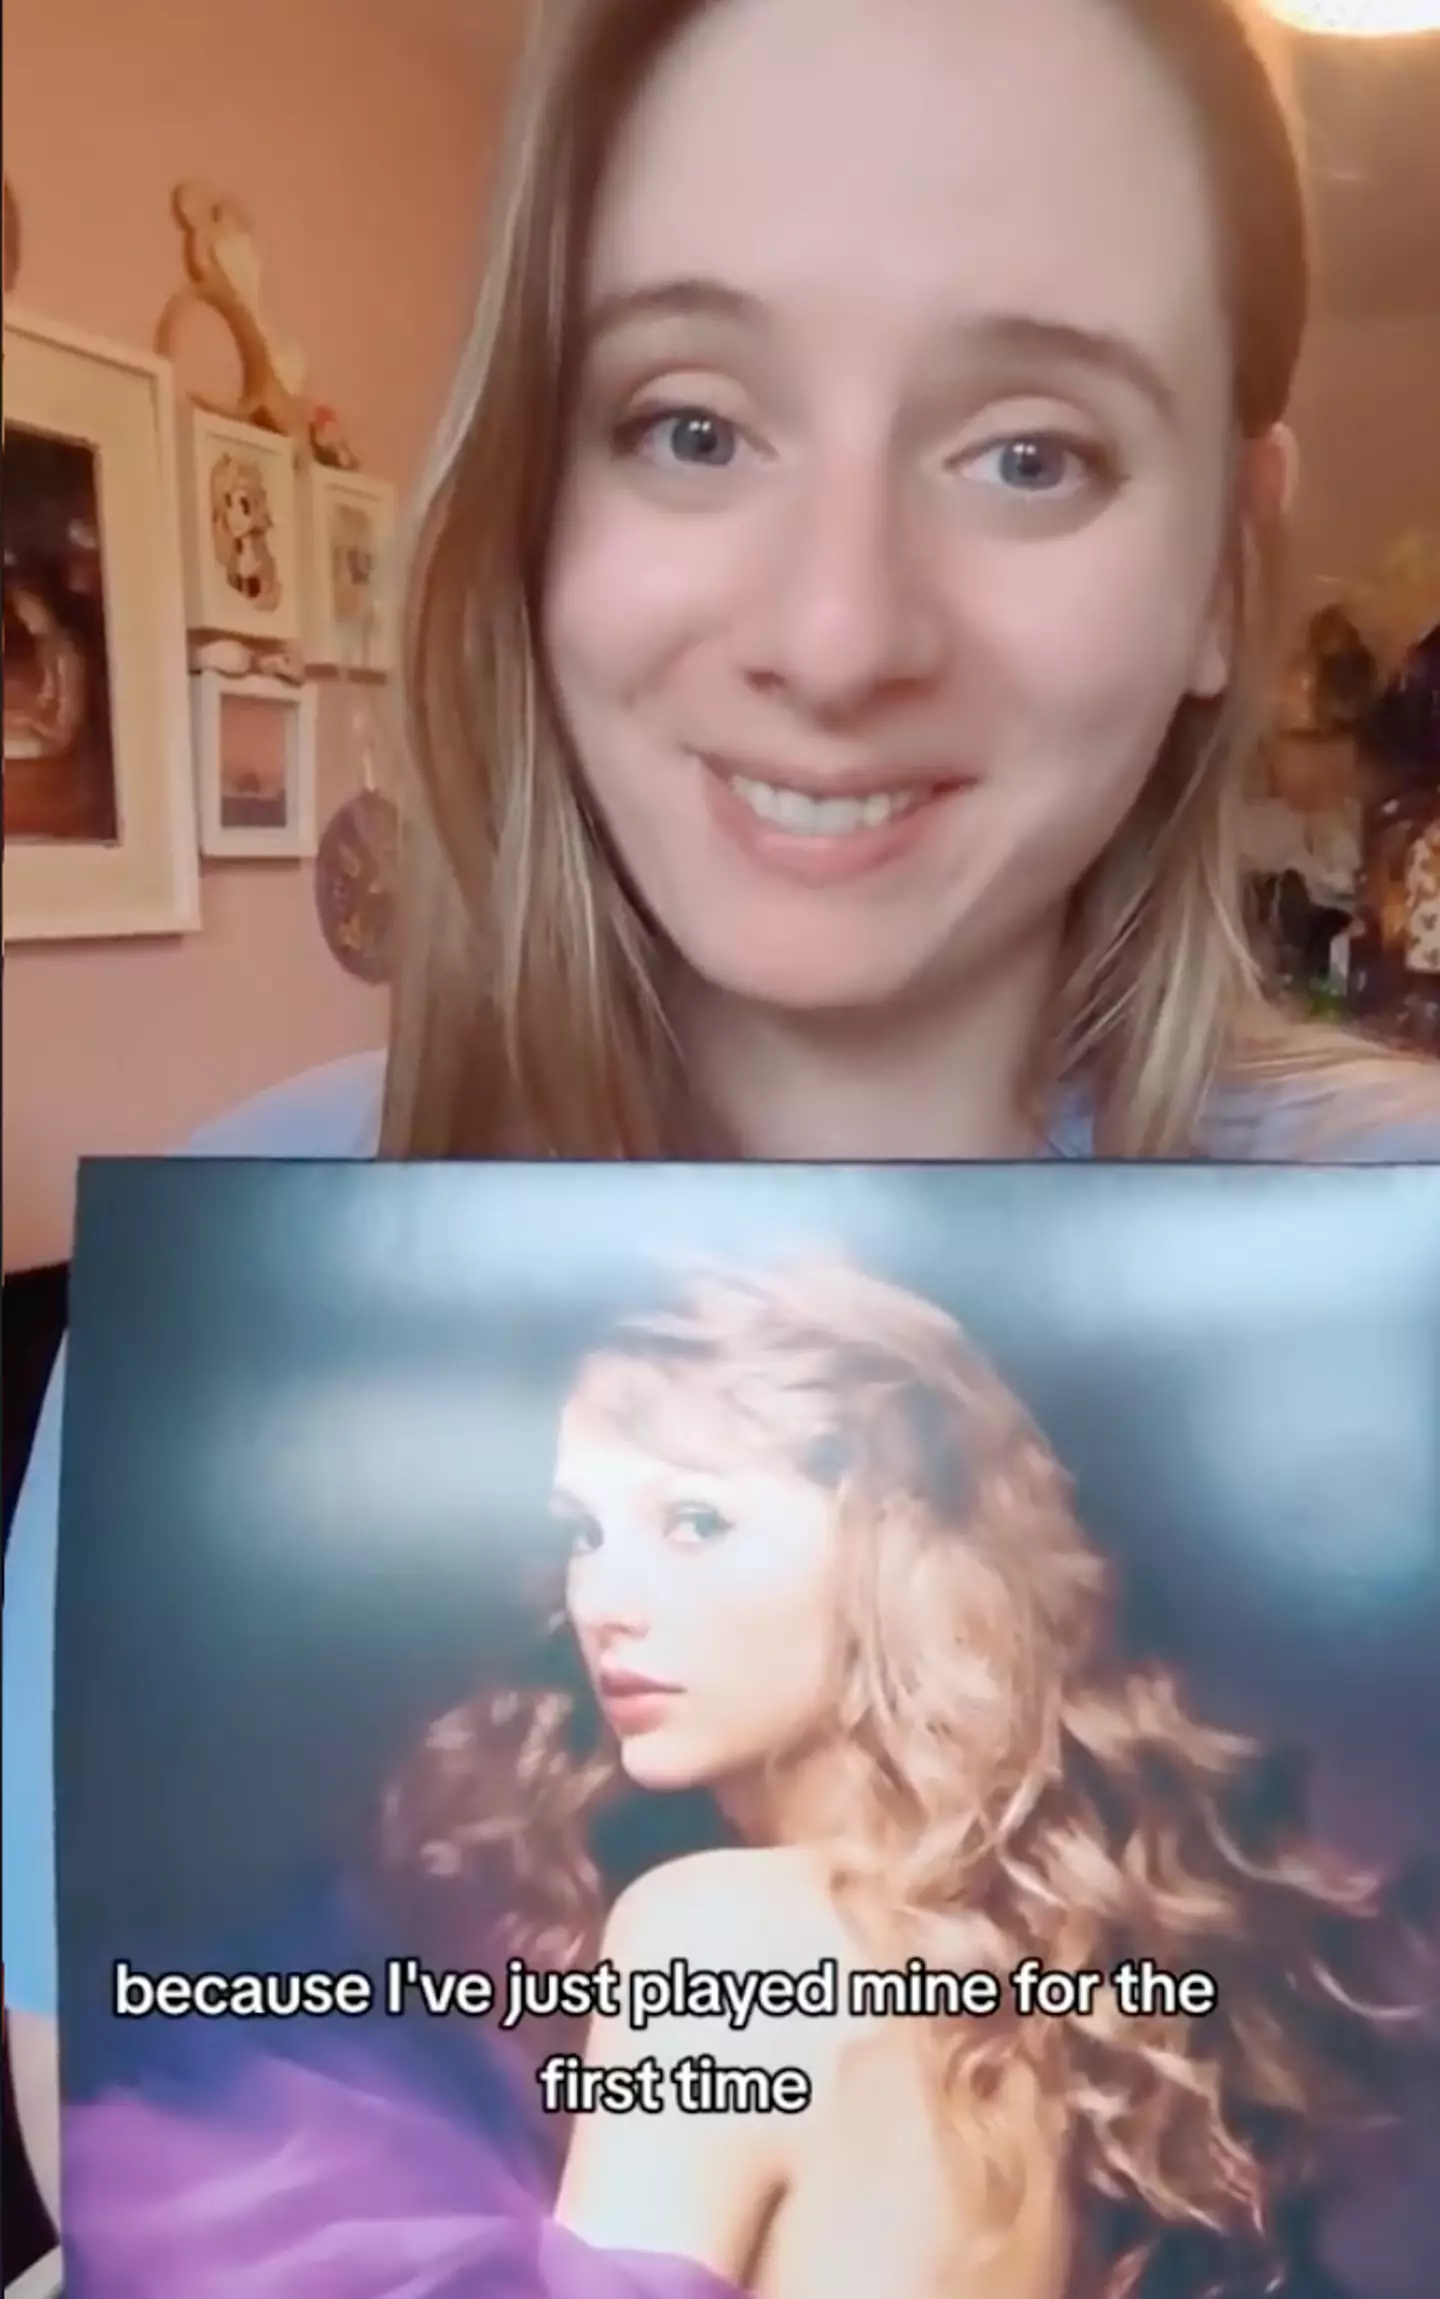 This Swiftie wants to keep her 'creepy' record.